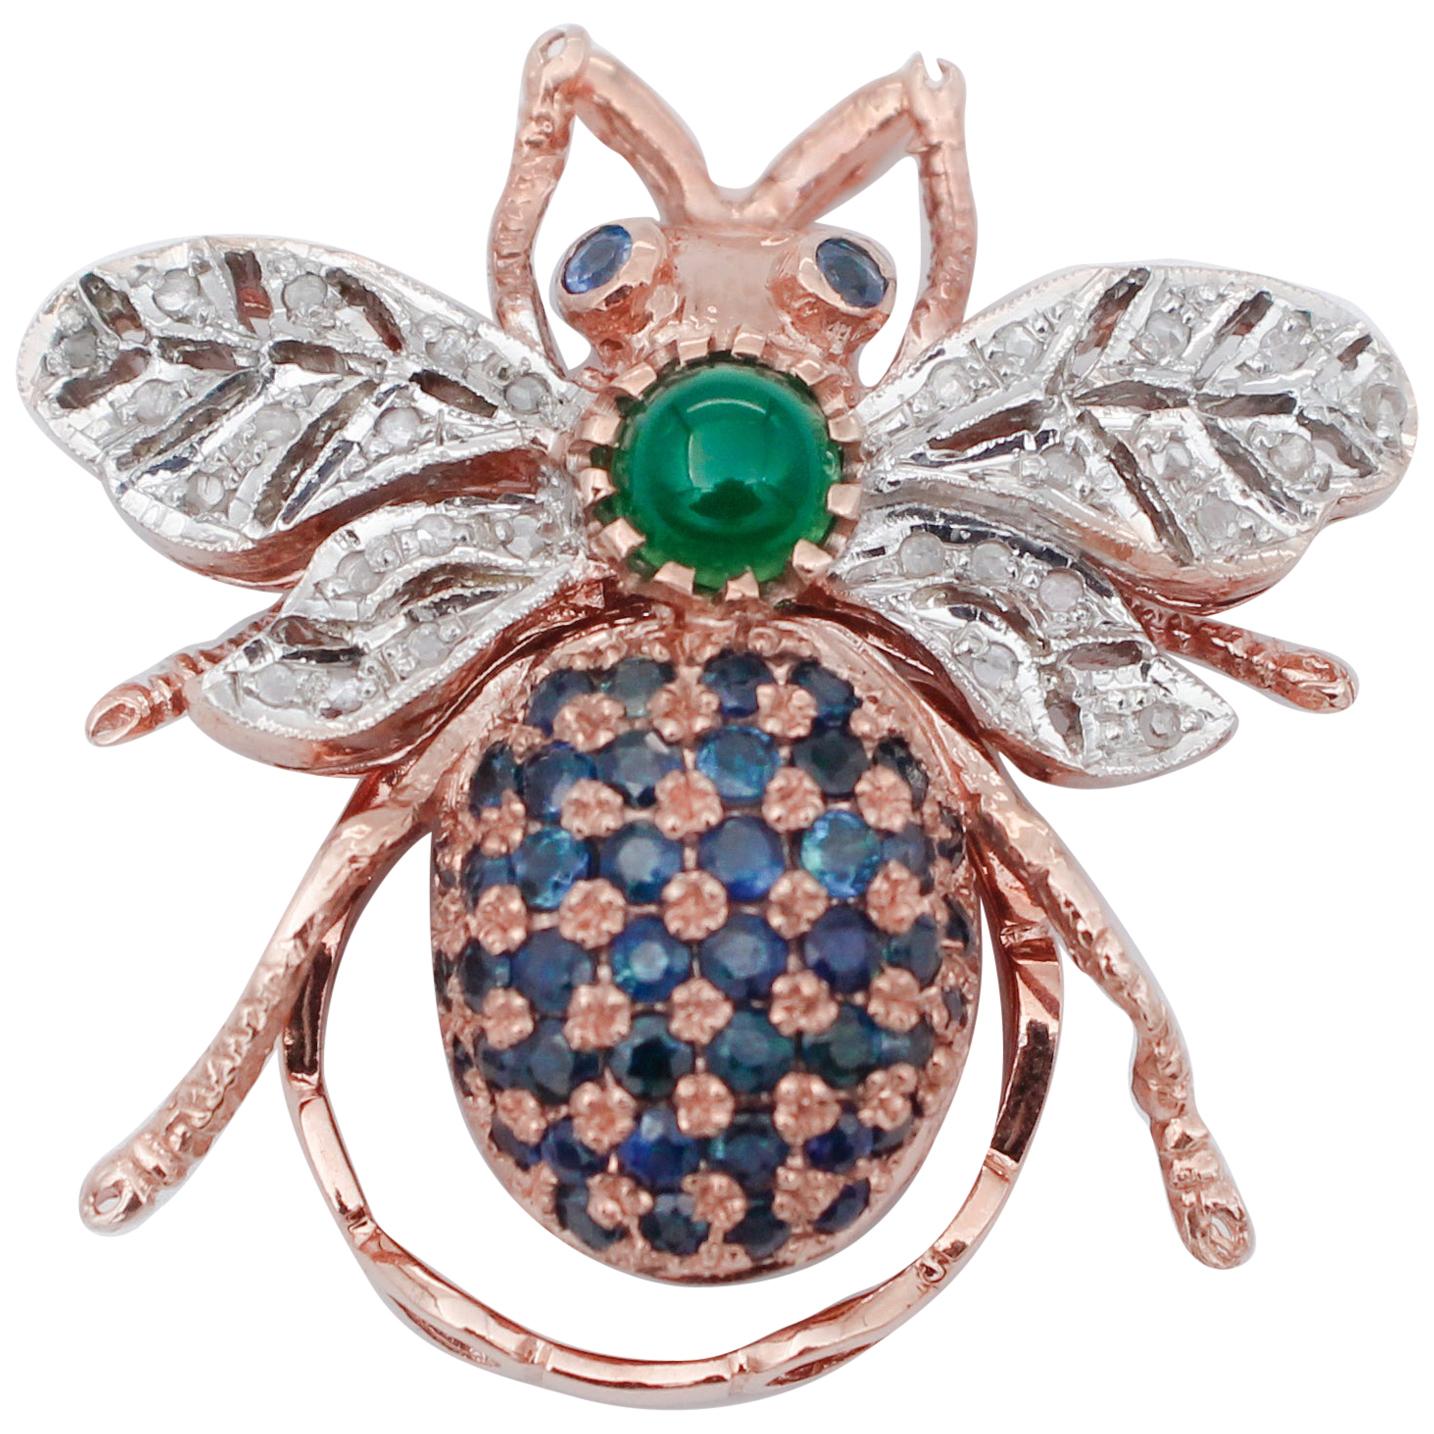 Diamonds, Sapphires, Green Agate, 9 Karat Rose Gold and Silver Fly Shape Ring